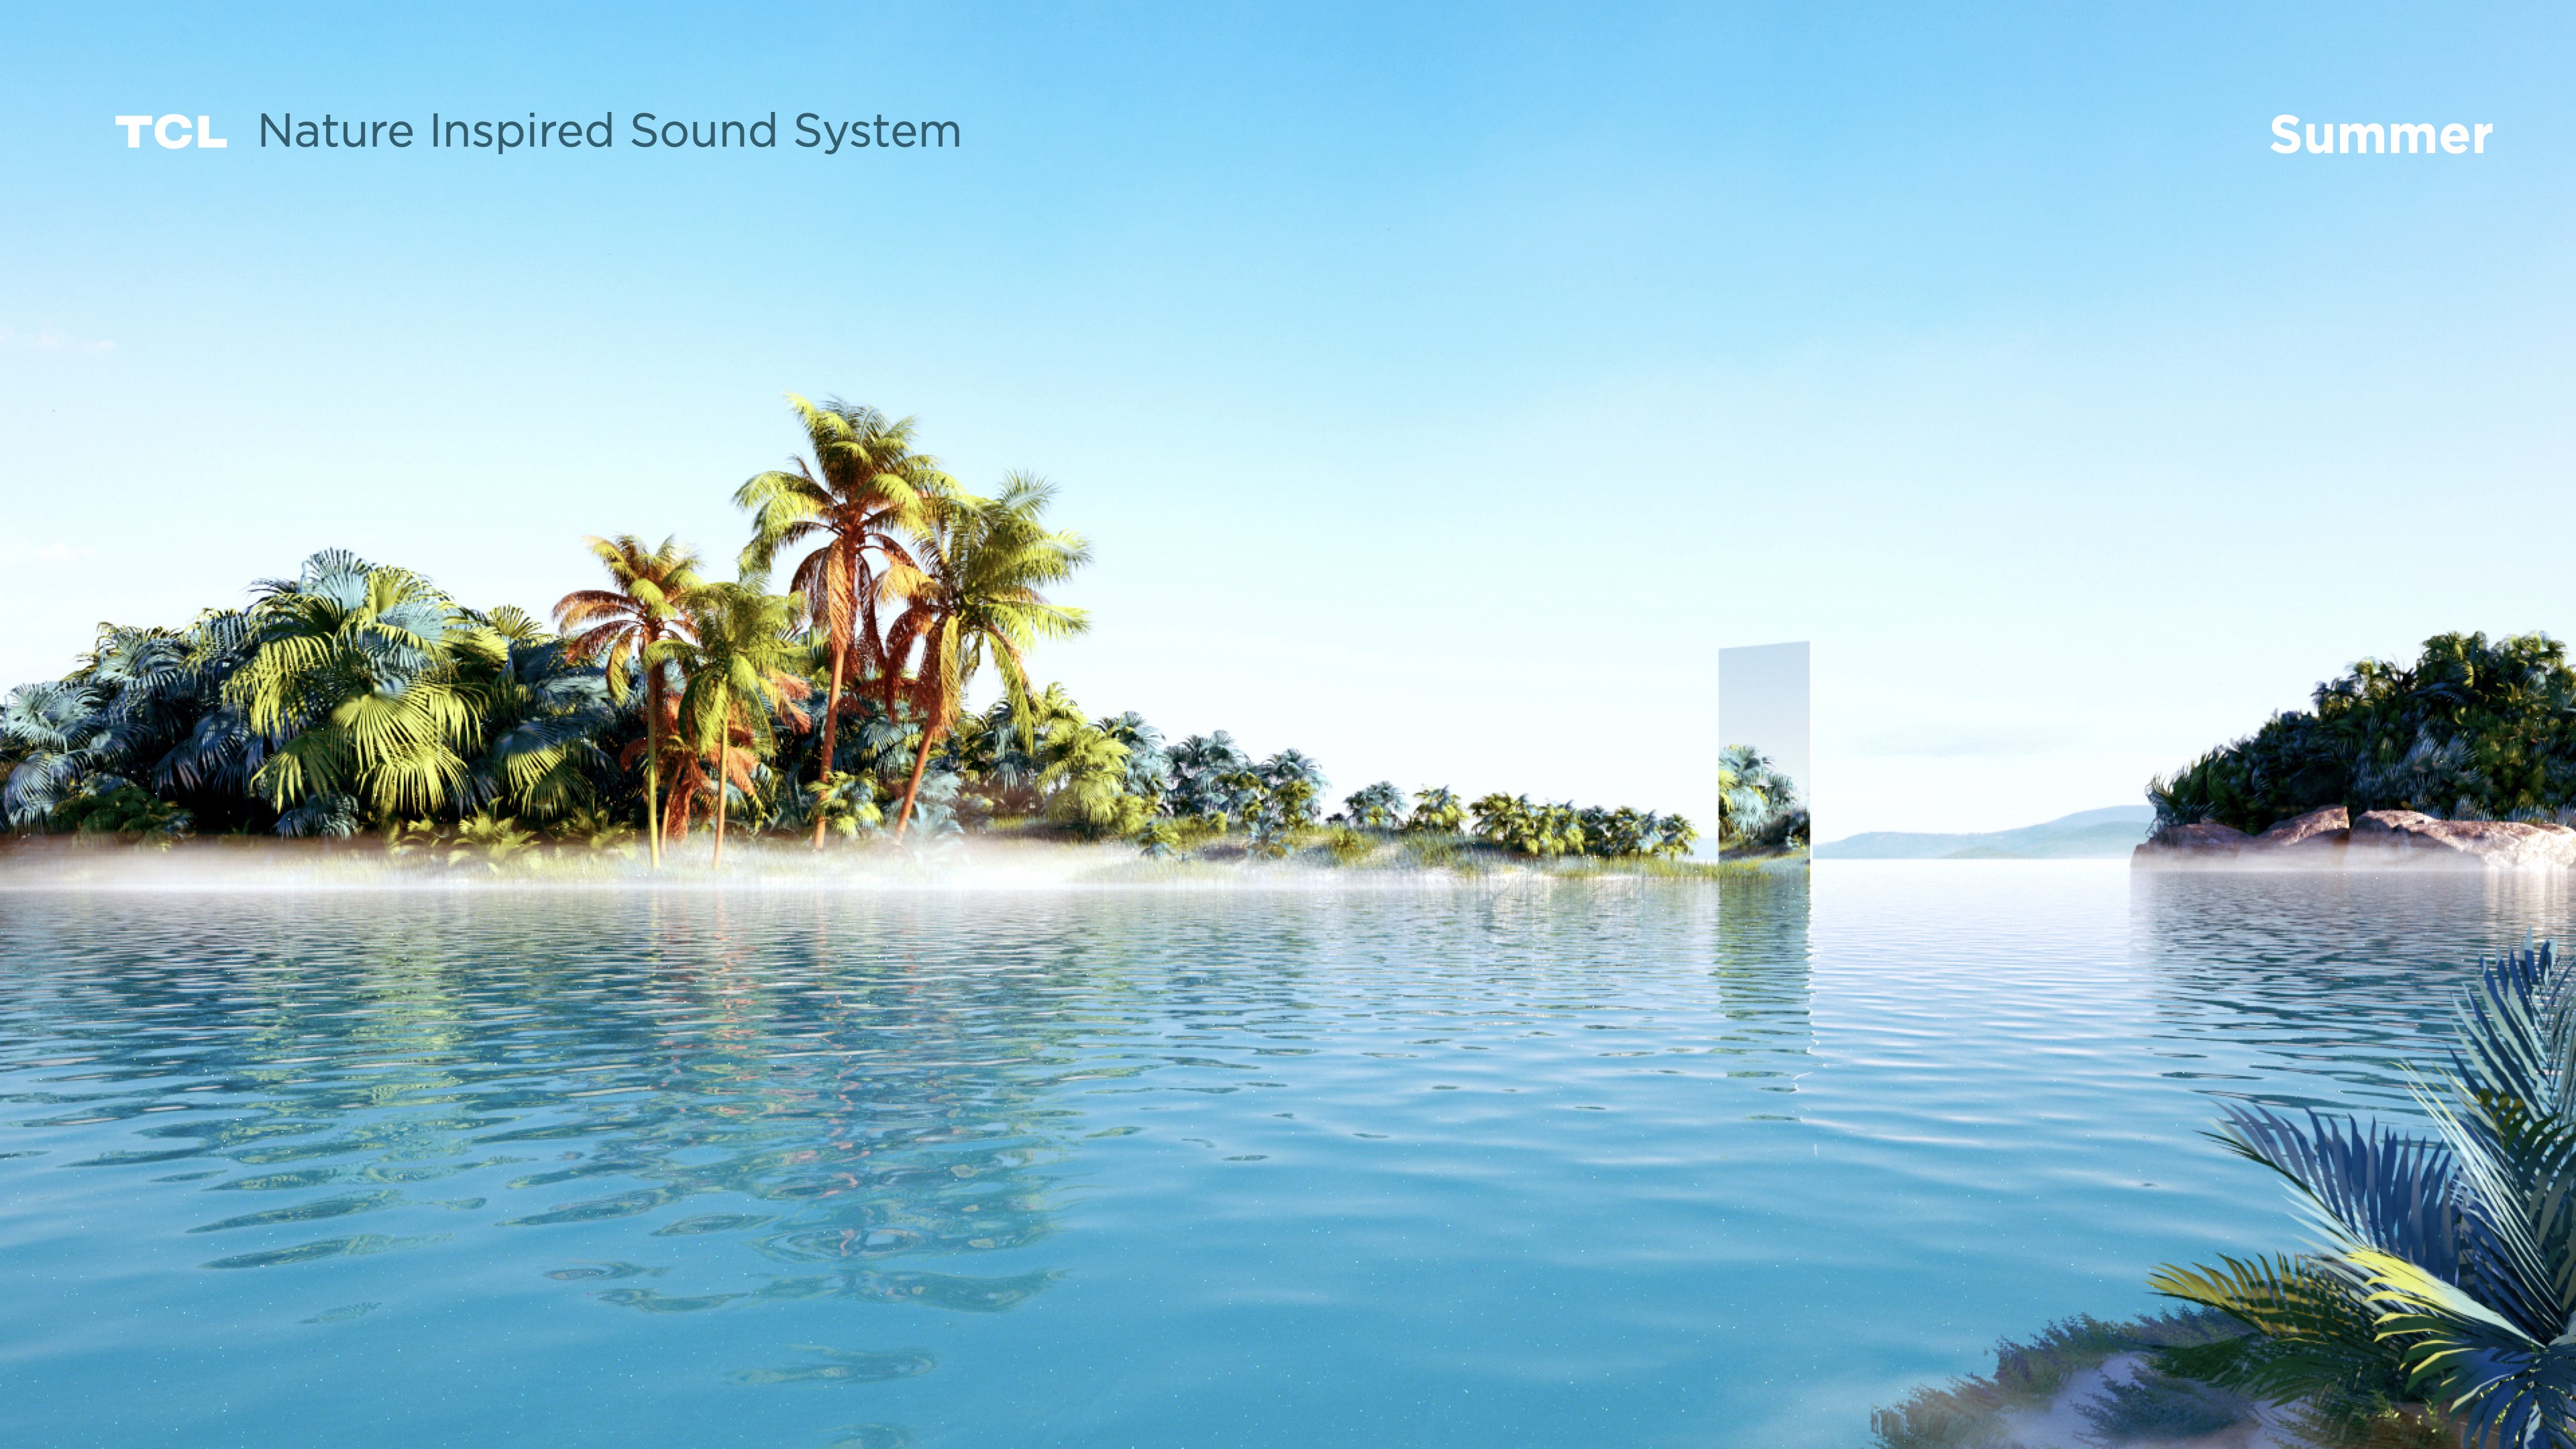 TCL Nature Inspired Sound System